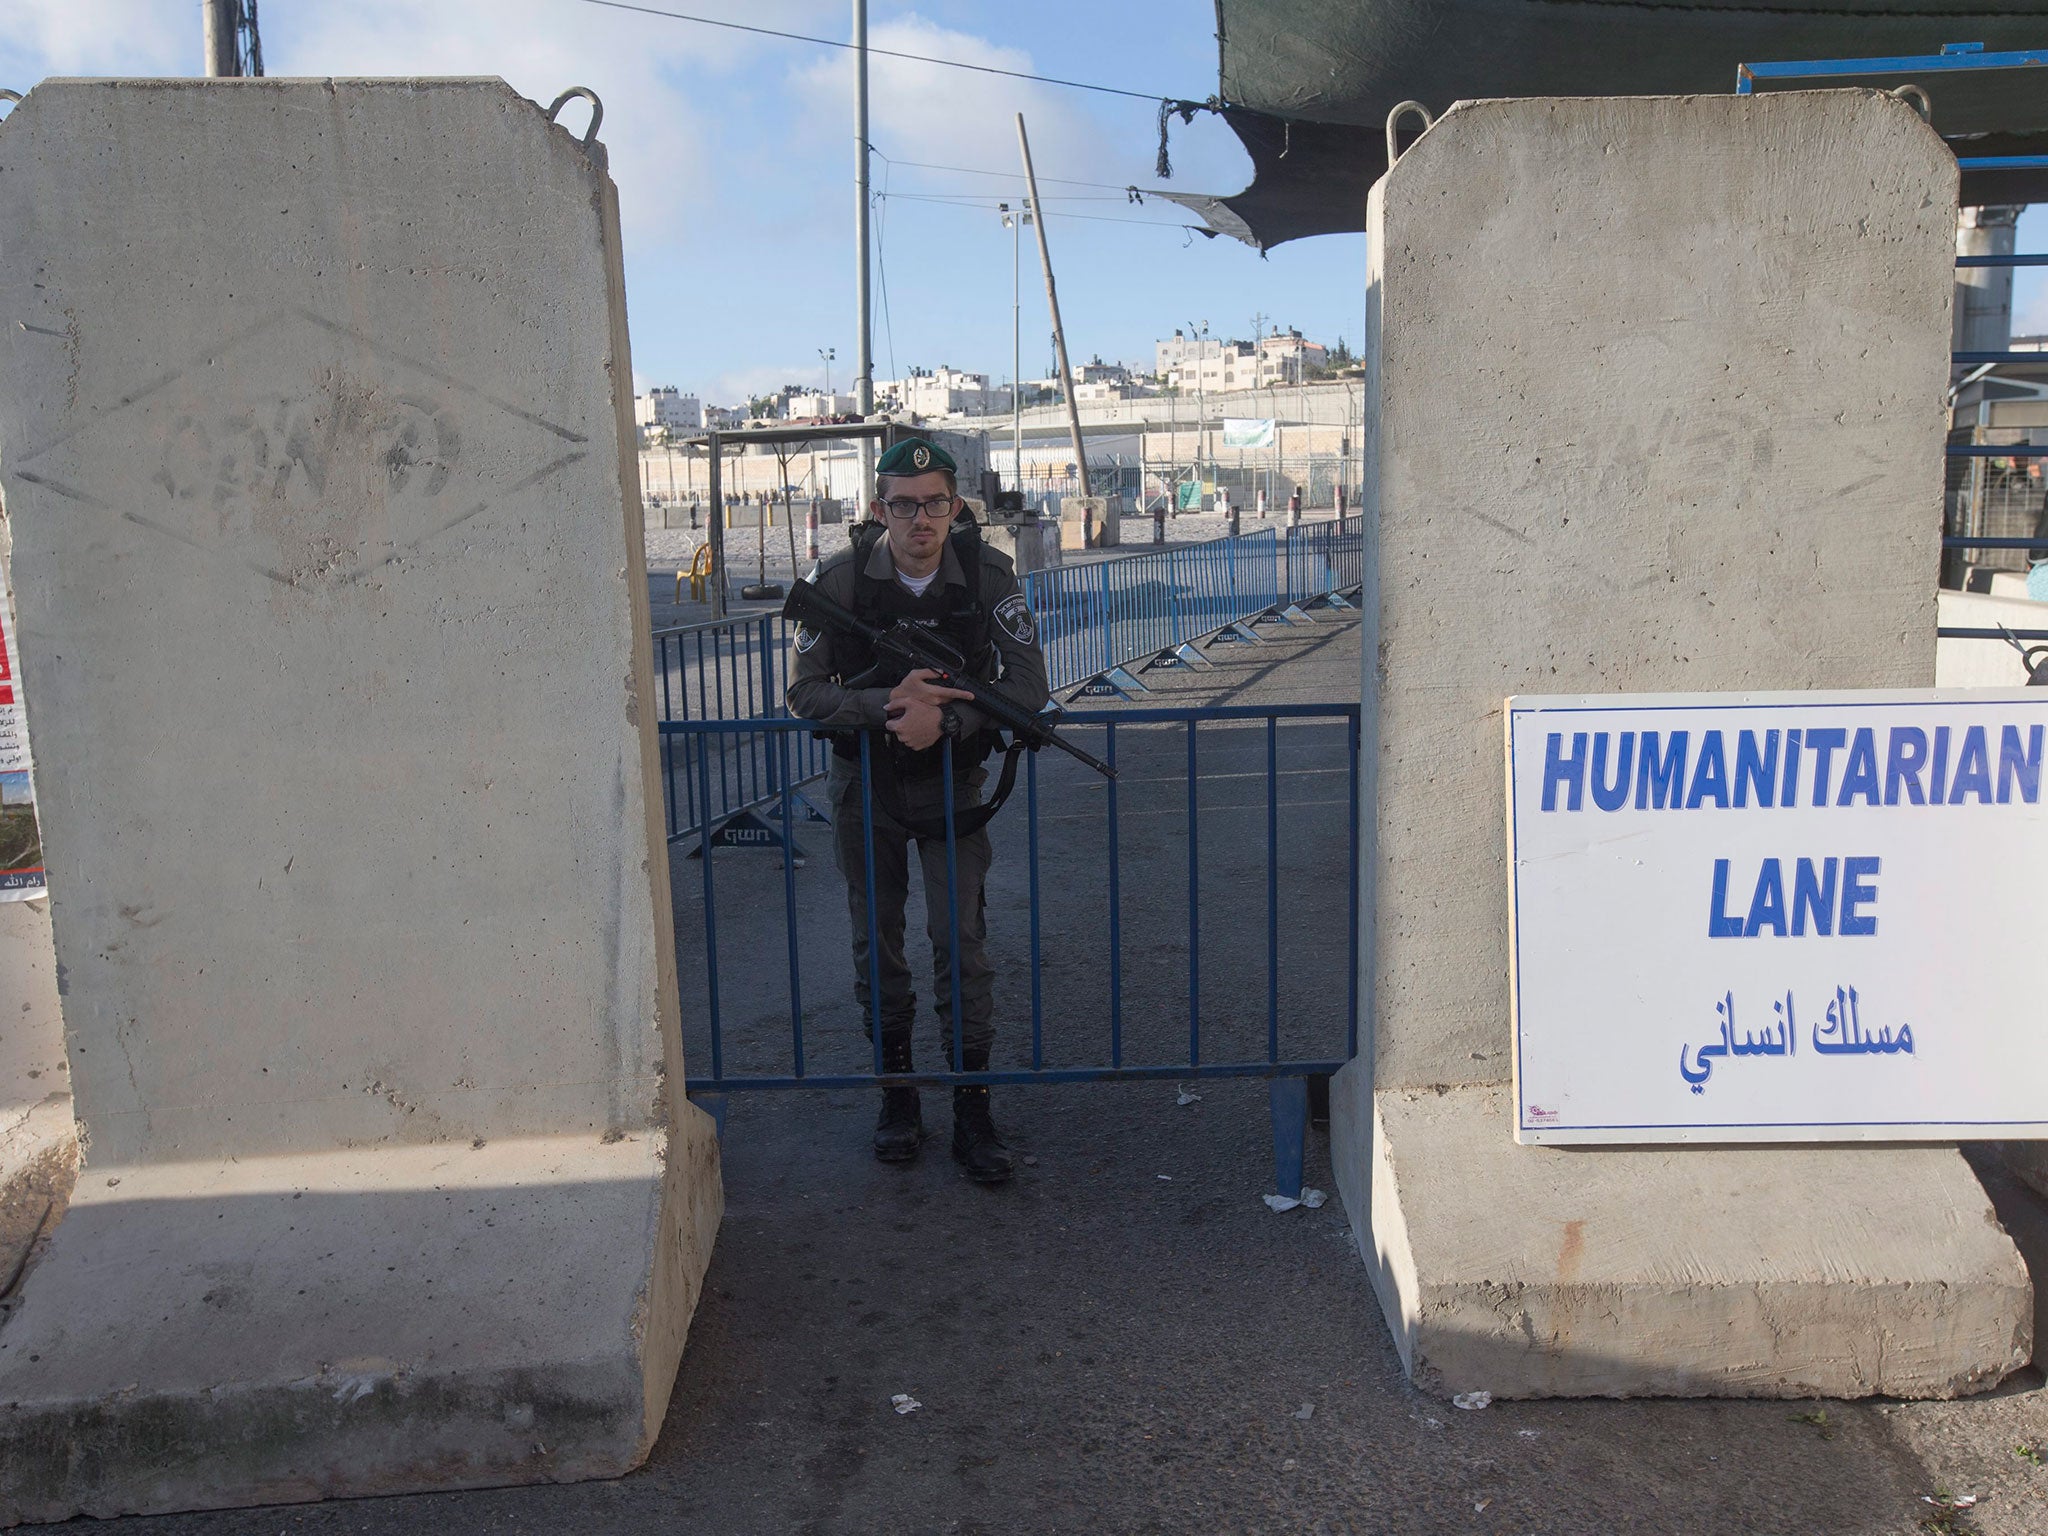 An Israeli border policeman stands guard at Qalandia checkpoint on 10 June 2016.